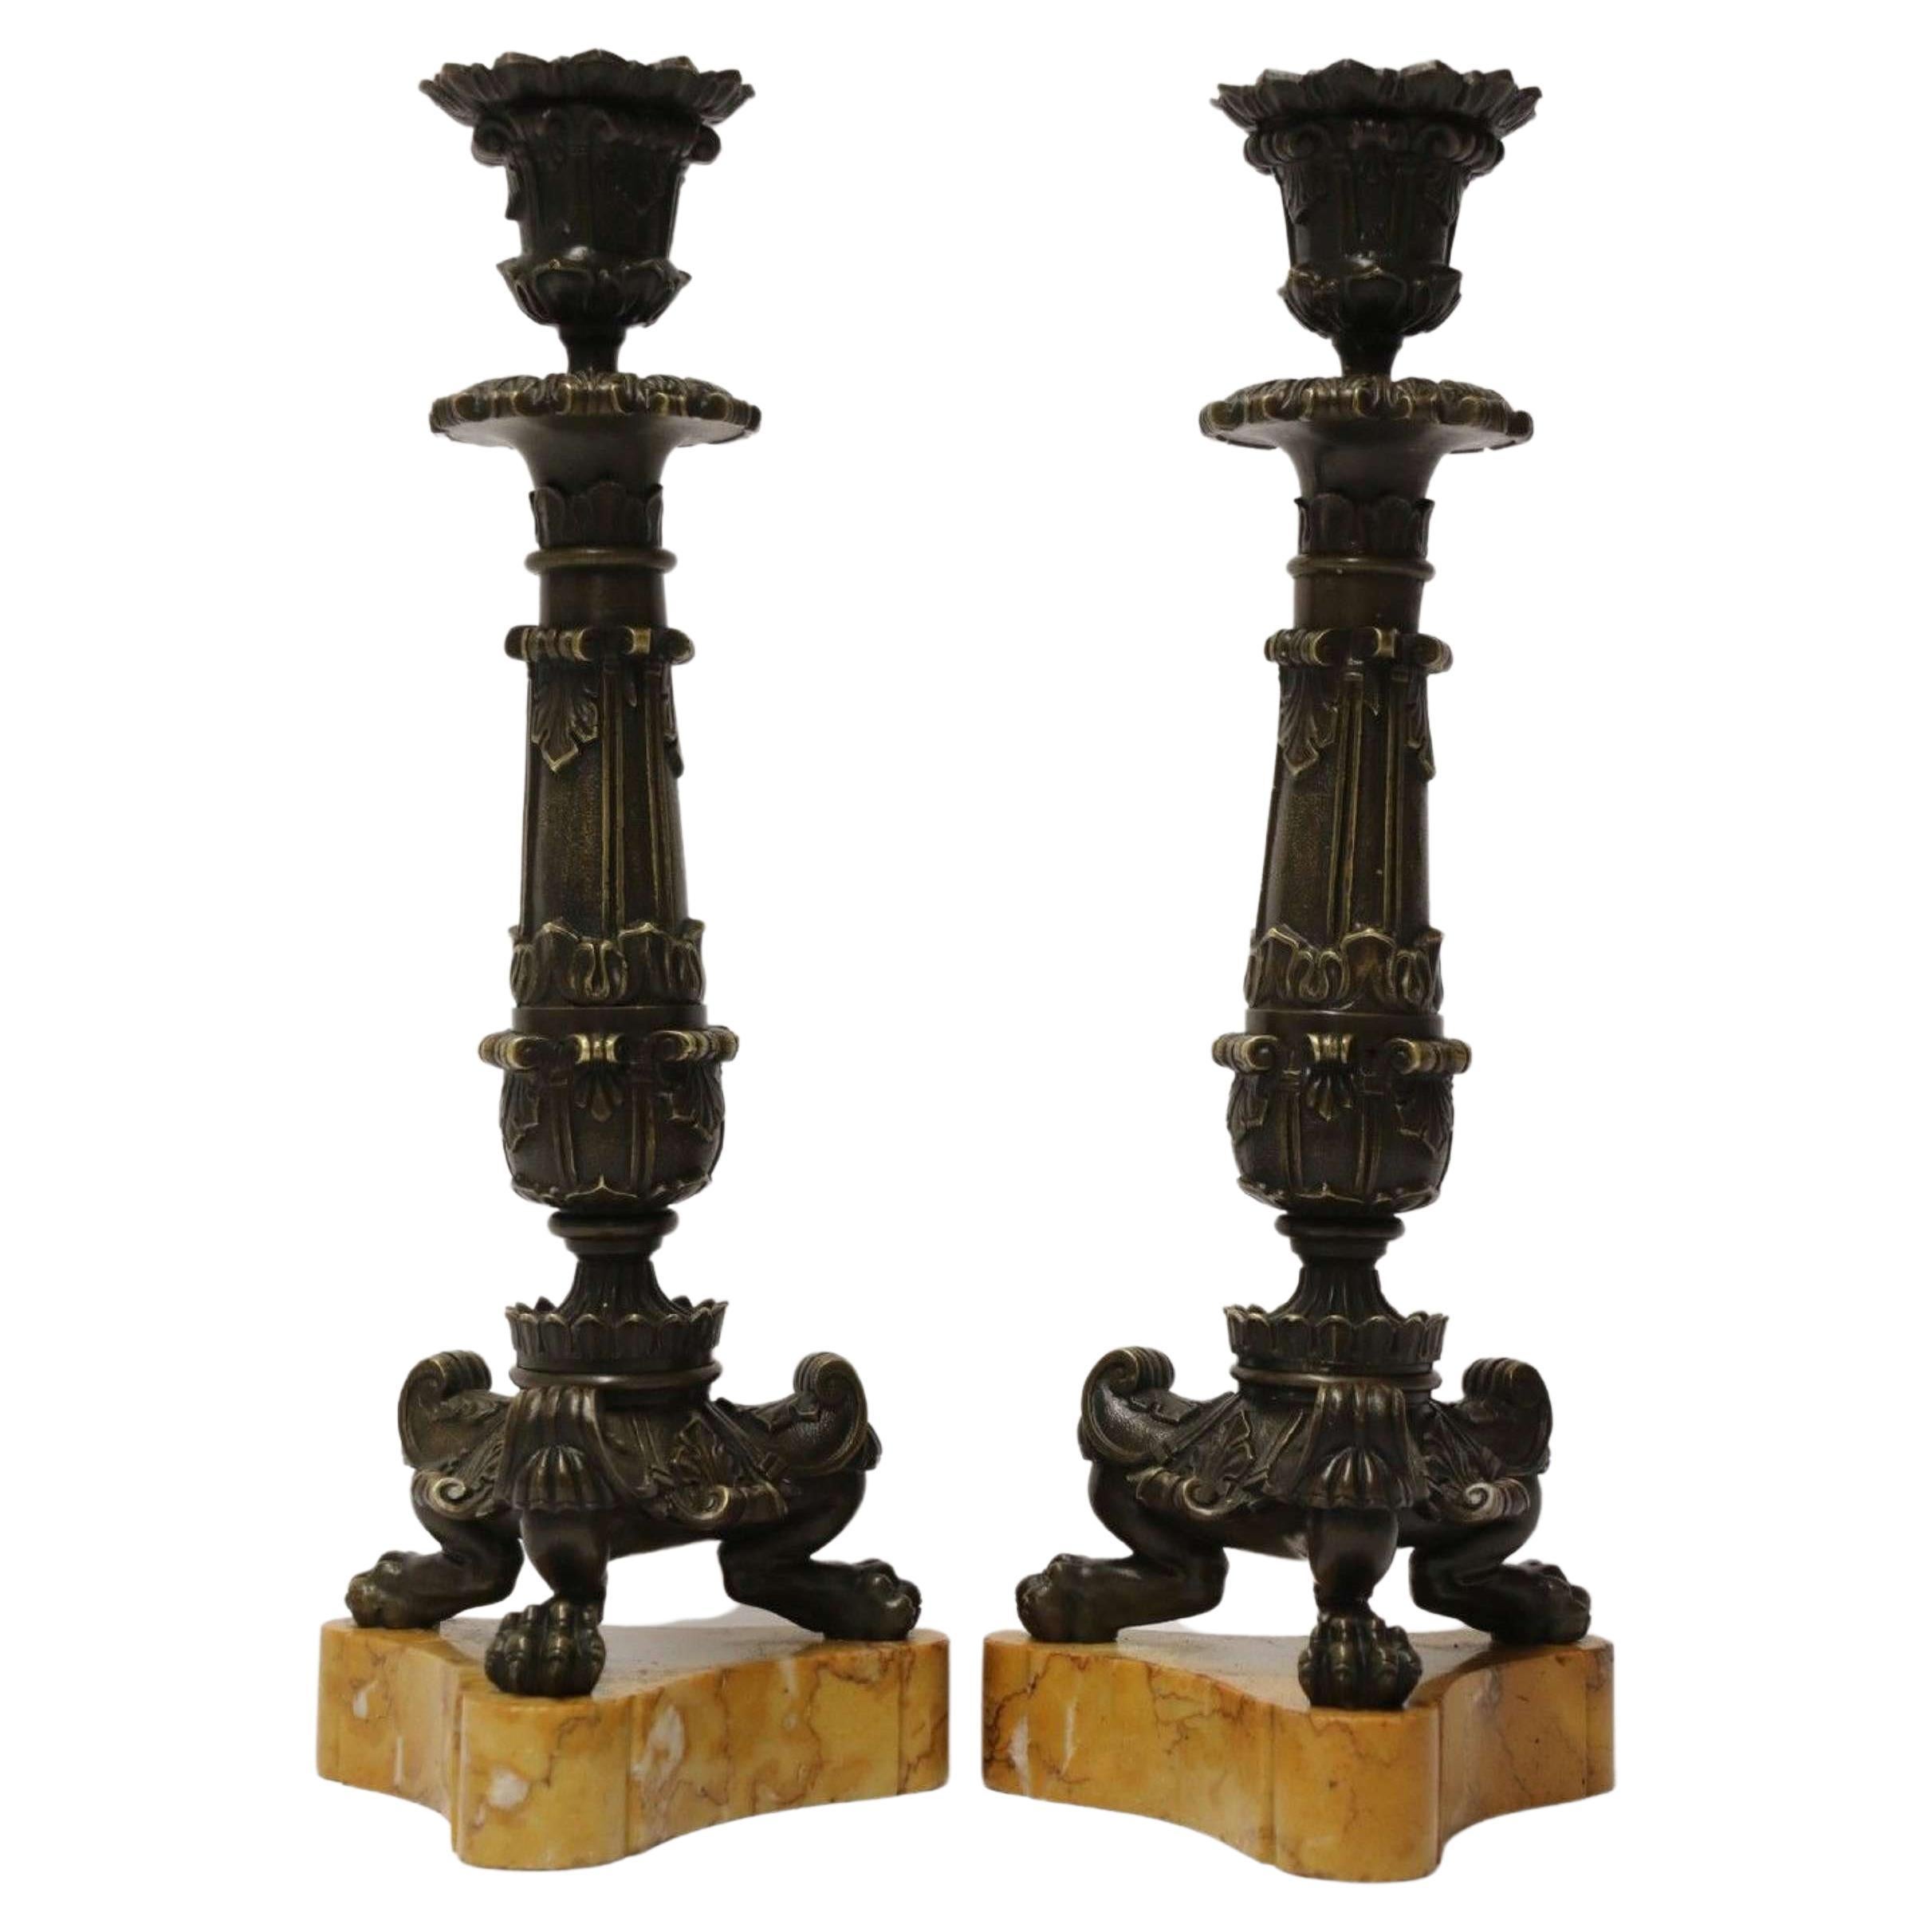 Pair of Early 19th Century French Empire Bronze Candlesticks, circa 1830